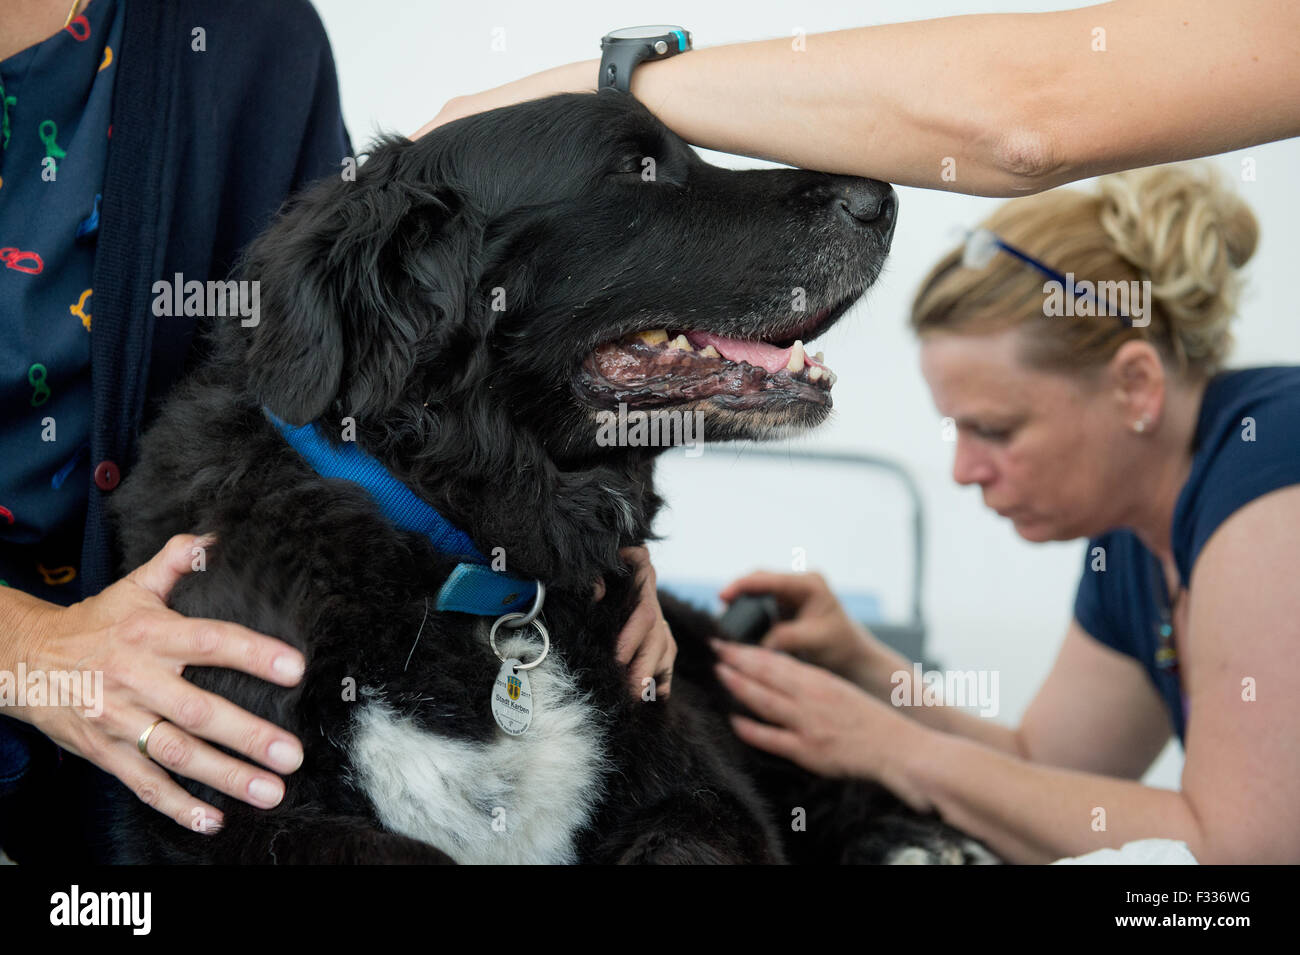 Animal physiotherapist Christine Kinbach treats 12-year-old dog Paul with  an ultrasound device, at the Physio Pet animal physiotherapy centre in  Frankfurt am Main, Germany, 28 July 2015. The centre offers a range